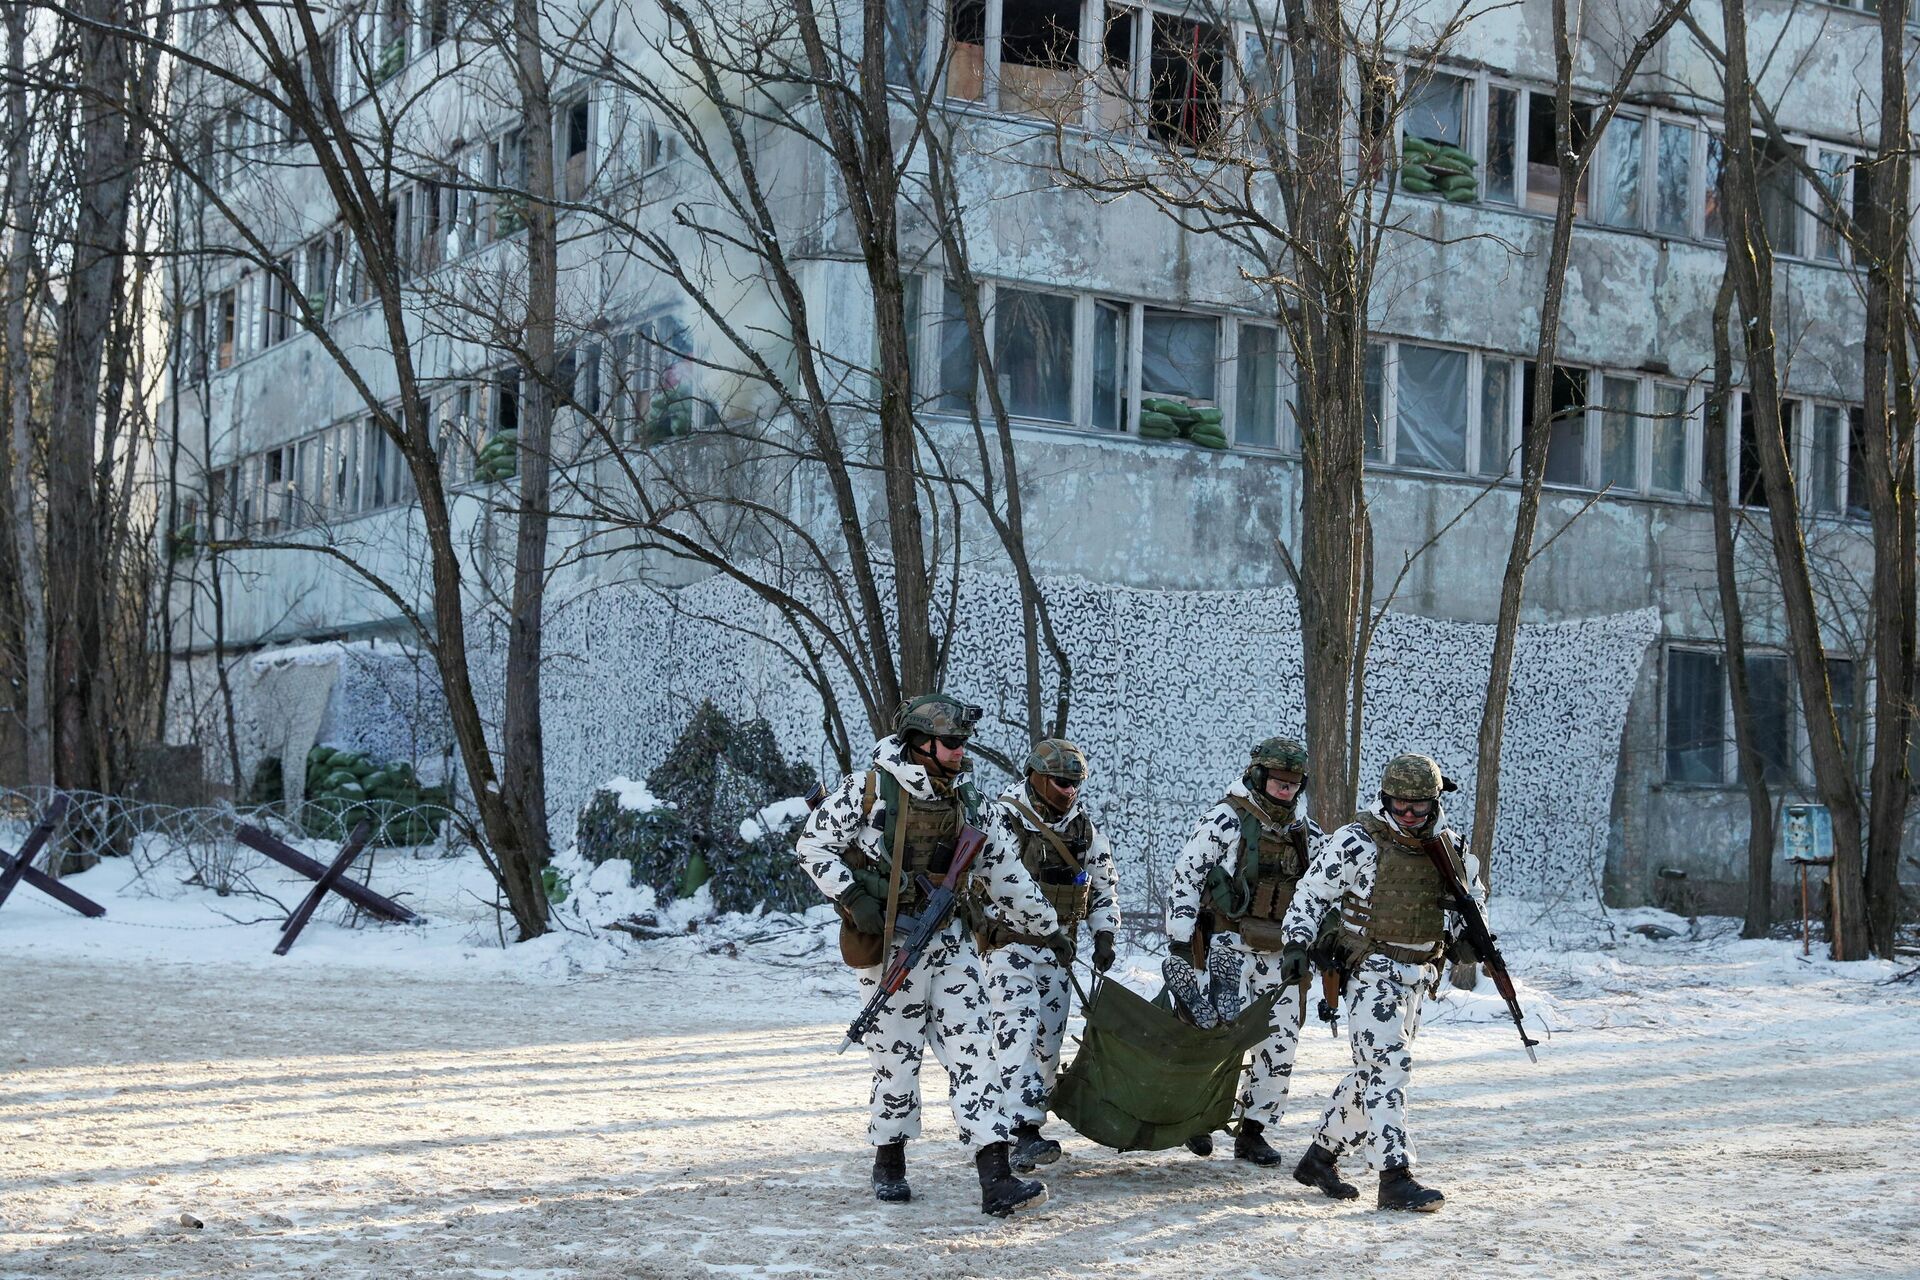 Service members take part in tactical exercises, which are conducted by the Ukrainian National Guard, Armed Forces, special operations units and simulate a crisis situation in an urban settlement, in the abandoned city of Pripyat near the Chernobyl Nuclear Power Plant, Ukraine February 4, 2022. - Sputnik International, 1920, 04.02.2022